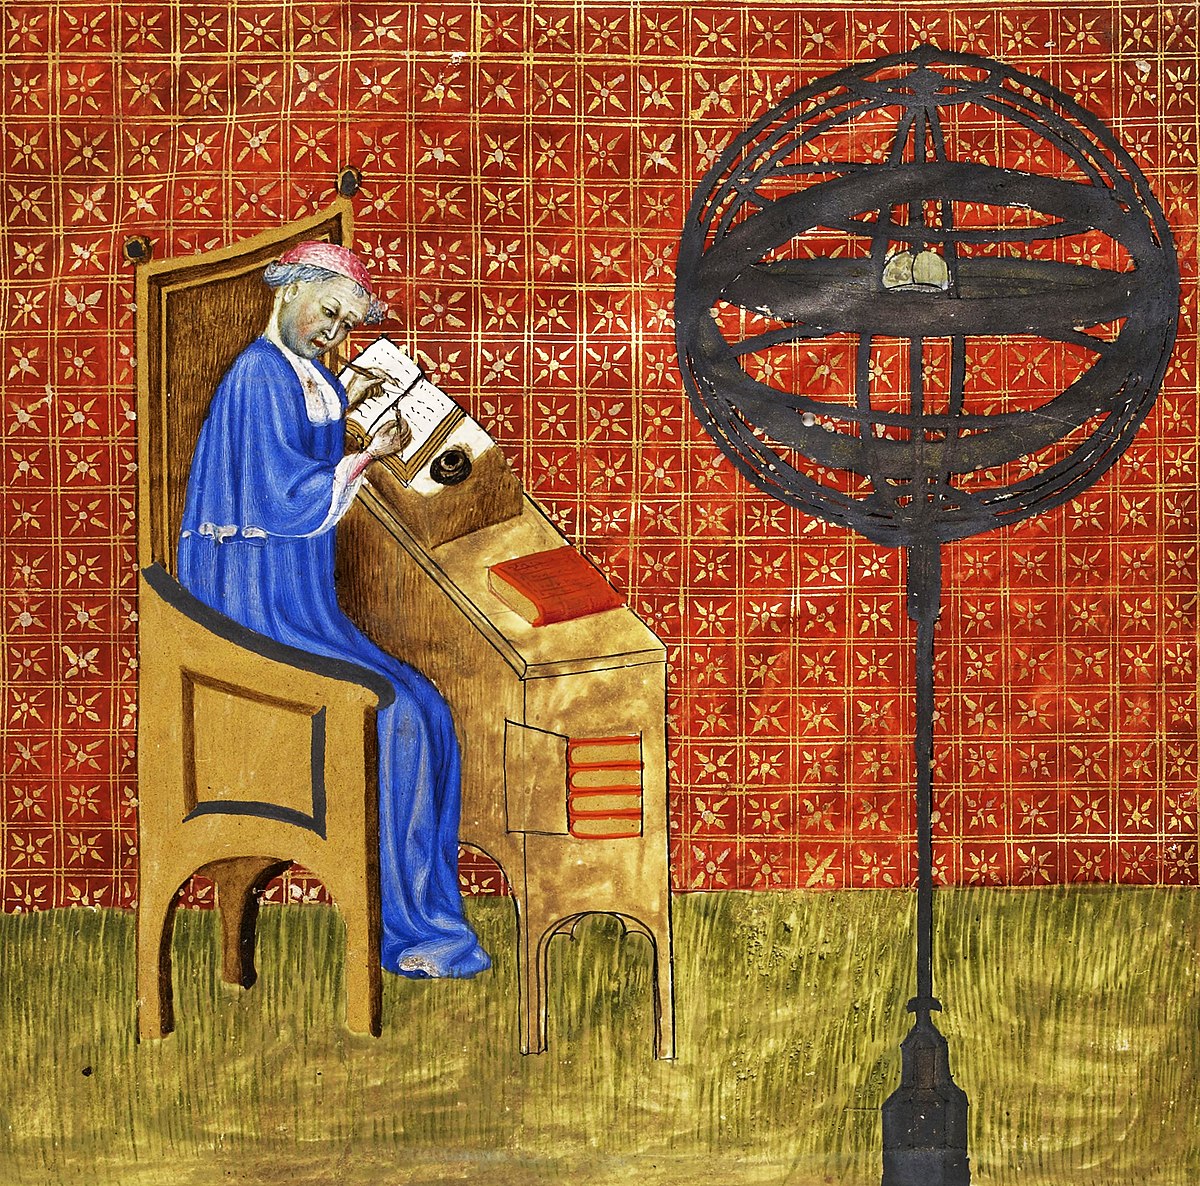 First page of the book "Traité de l'espère". The miniature represents Nicole Oresme busy at his studies, with an armillary sphere in the foreground.